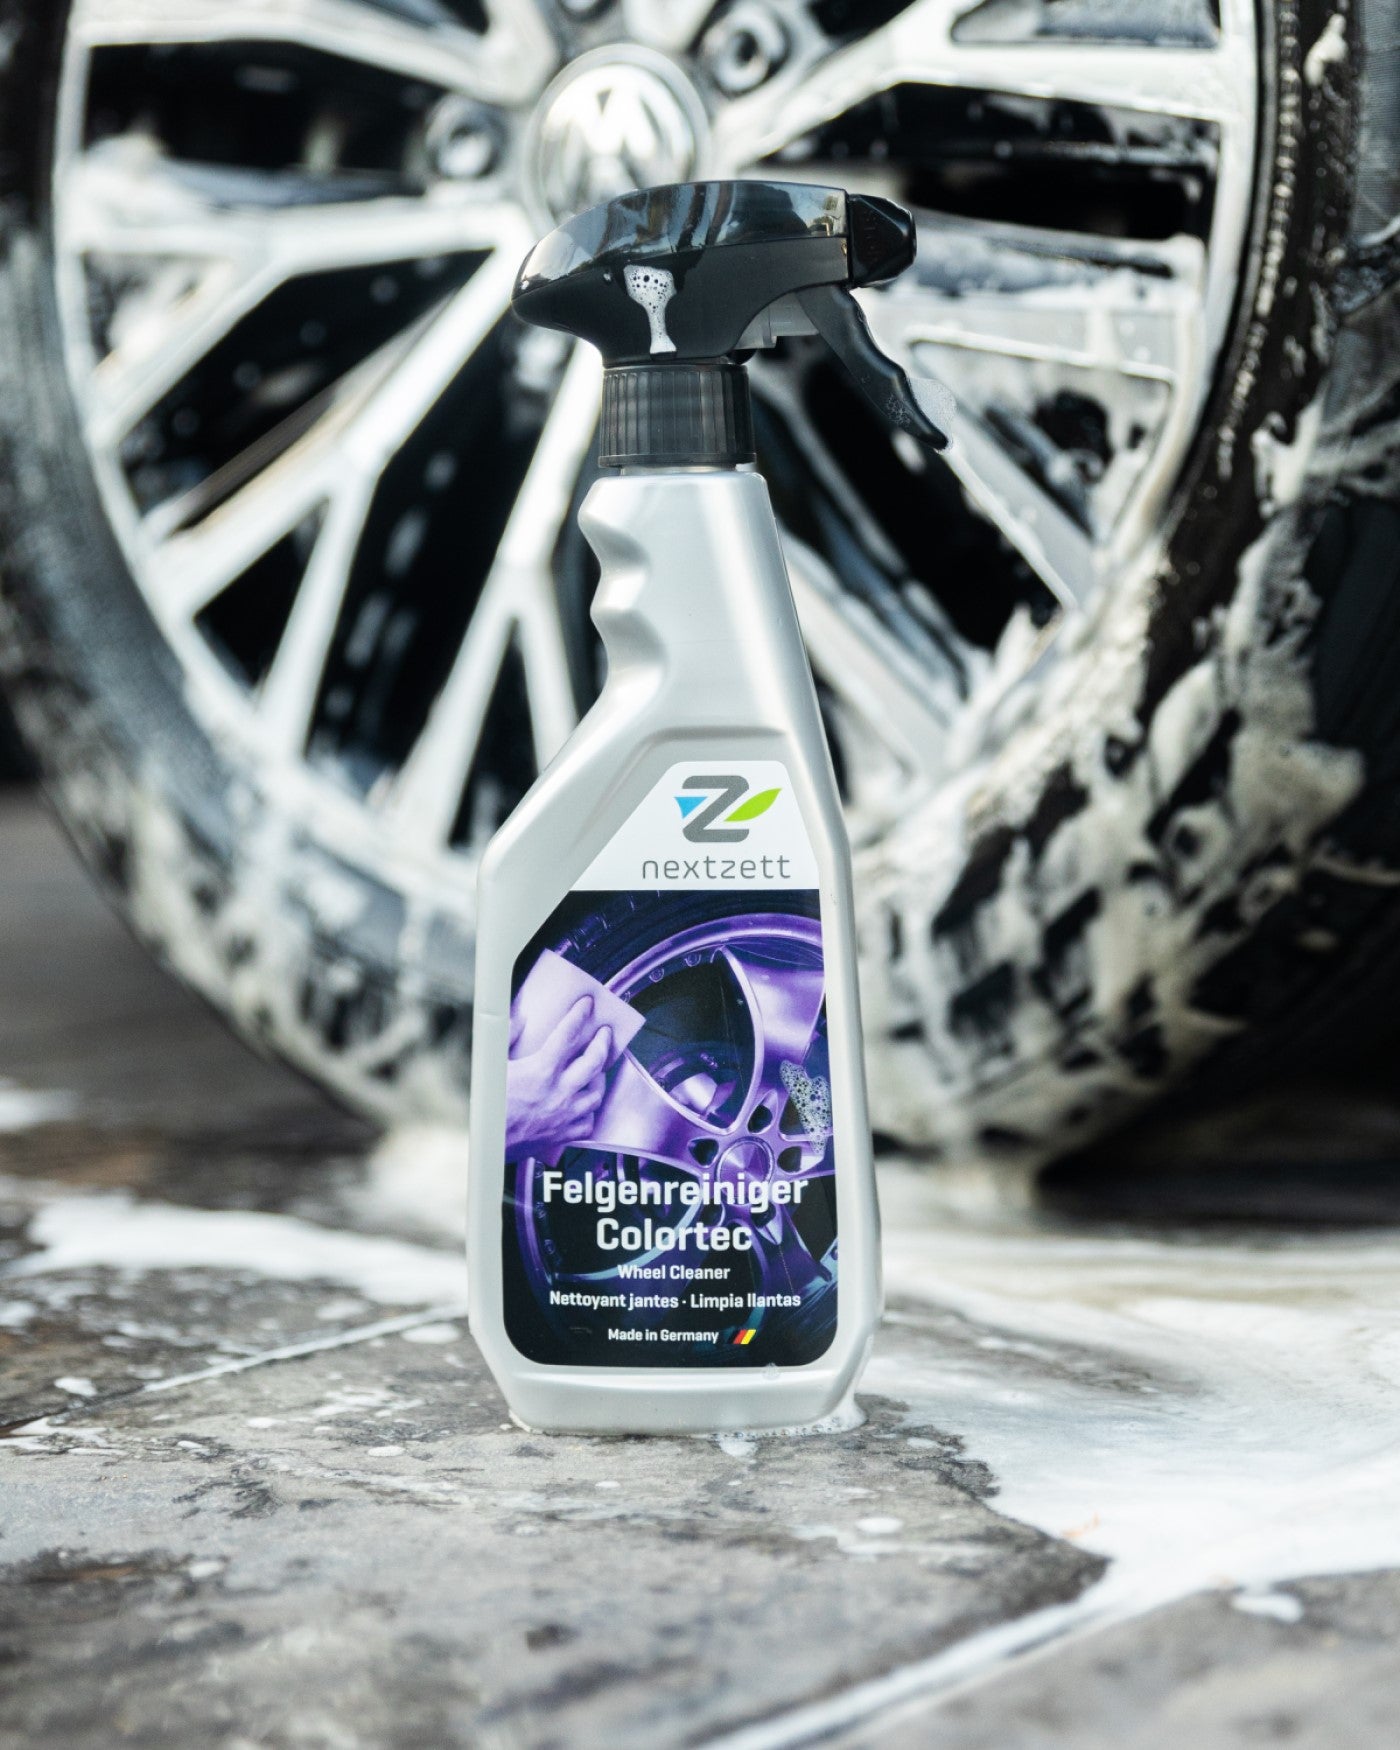 nextzett colortec wheel cleaner for cleaning wheels and removing iron contaminants